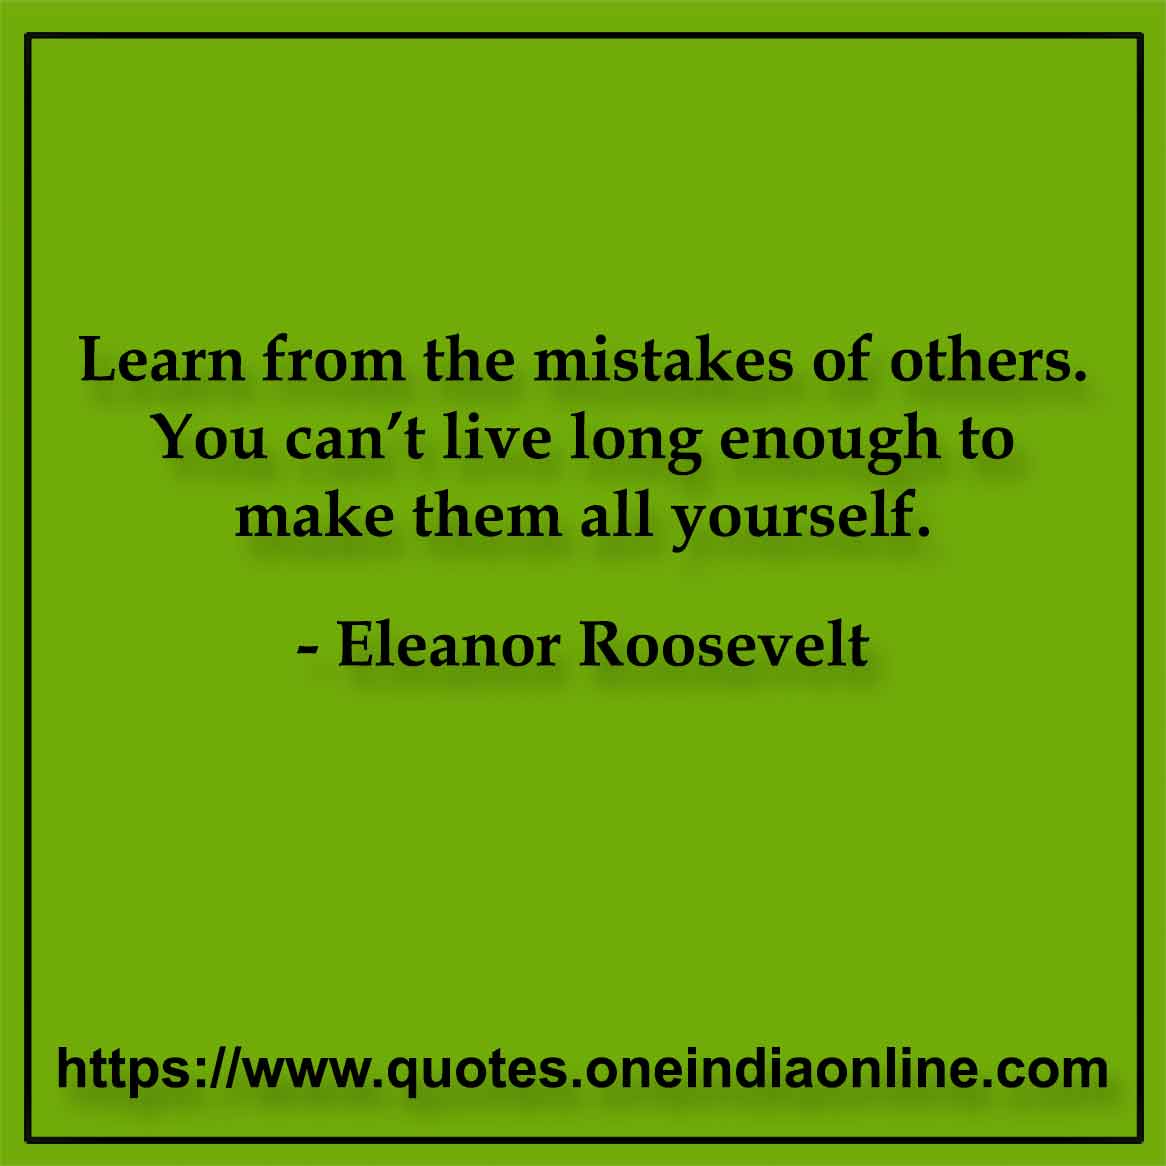 Learn from the mistakes of others. You can’t live long enough to make them all yourself.

- Eleanor Roosevelt